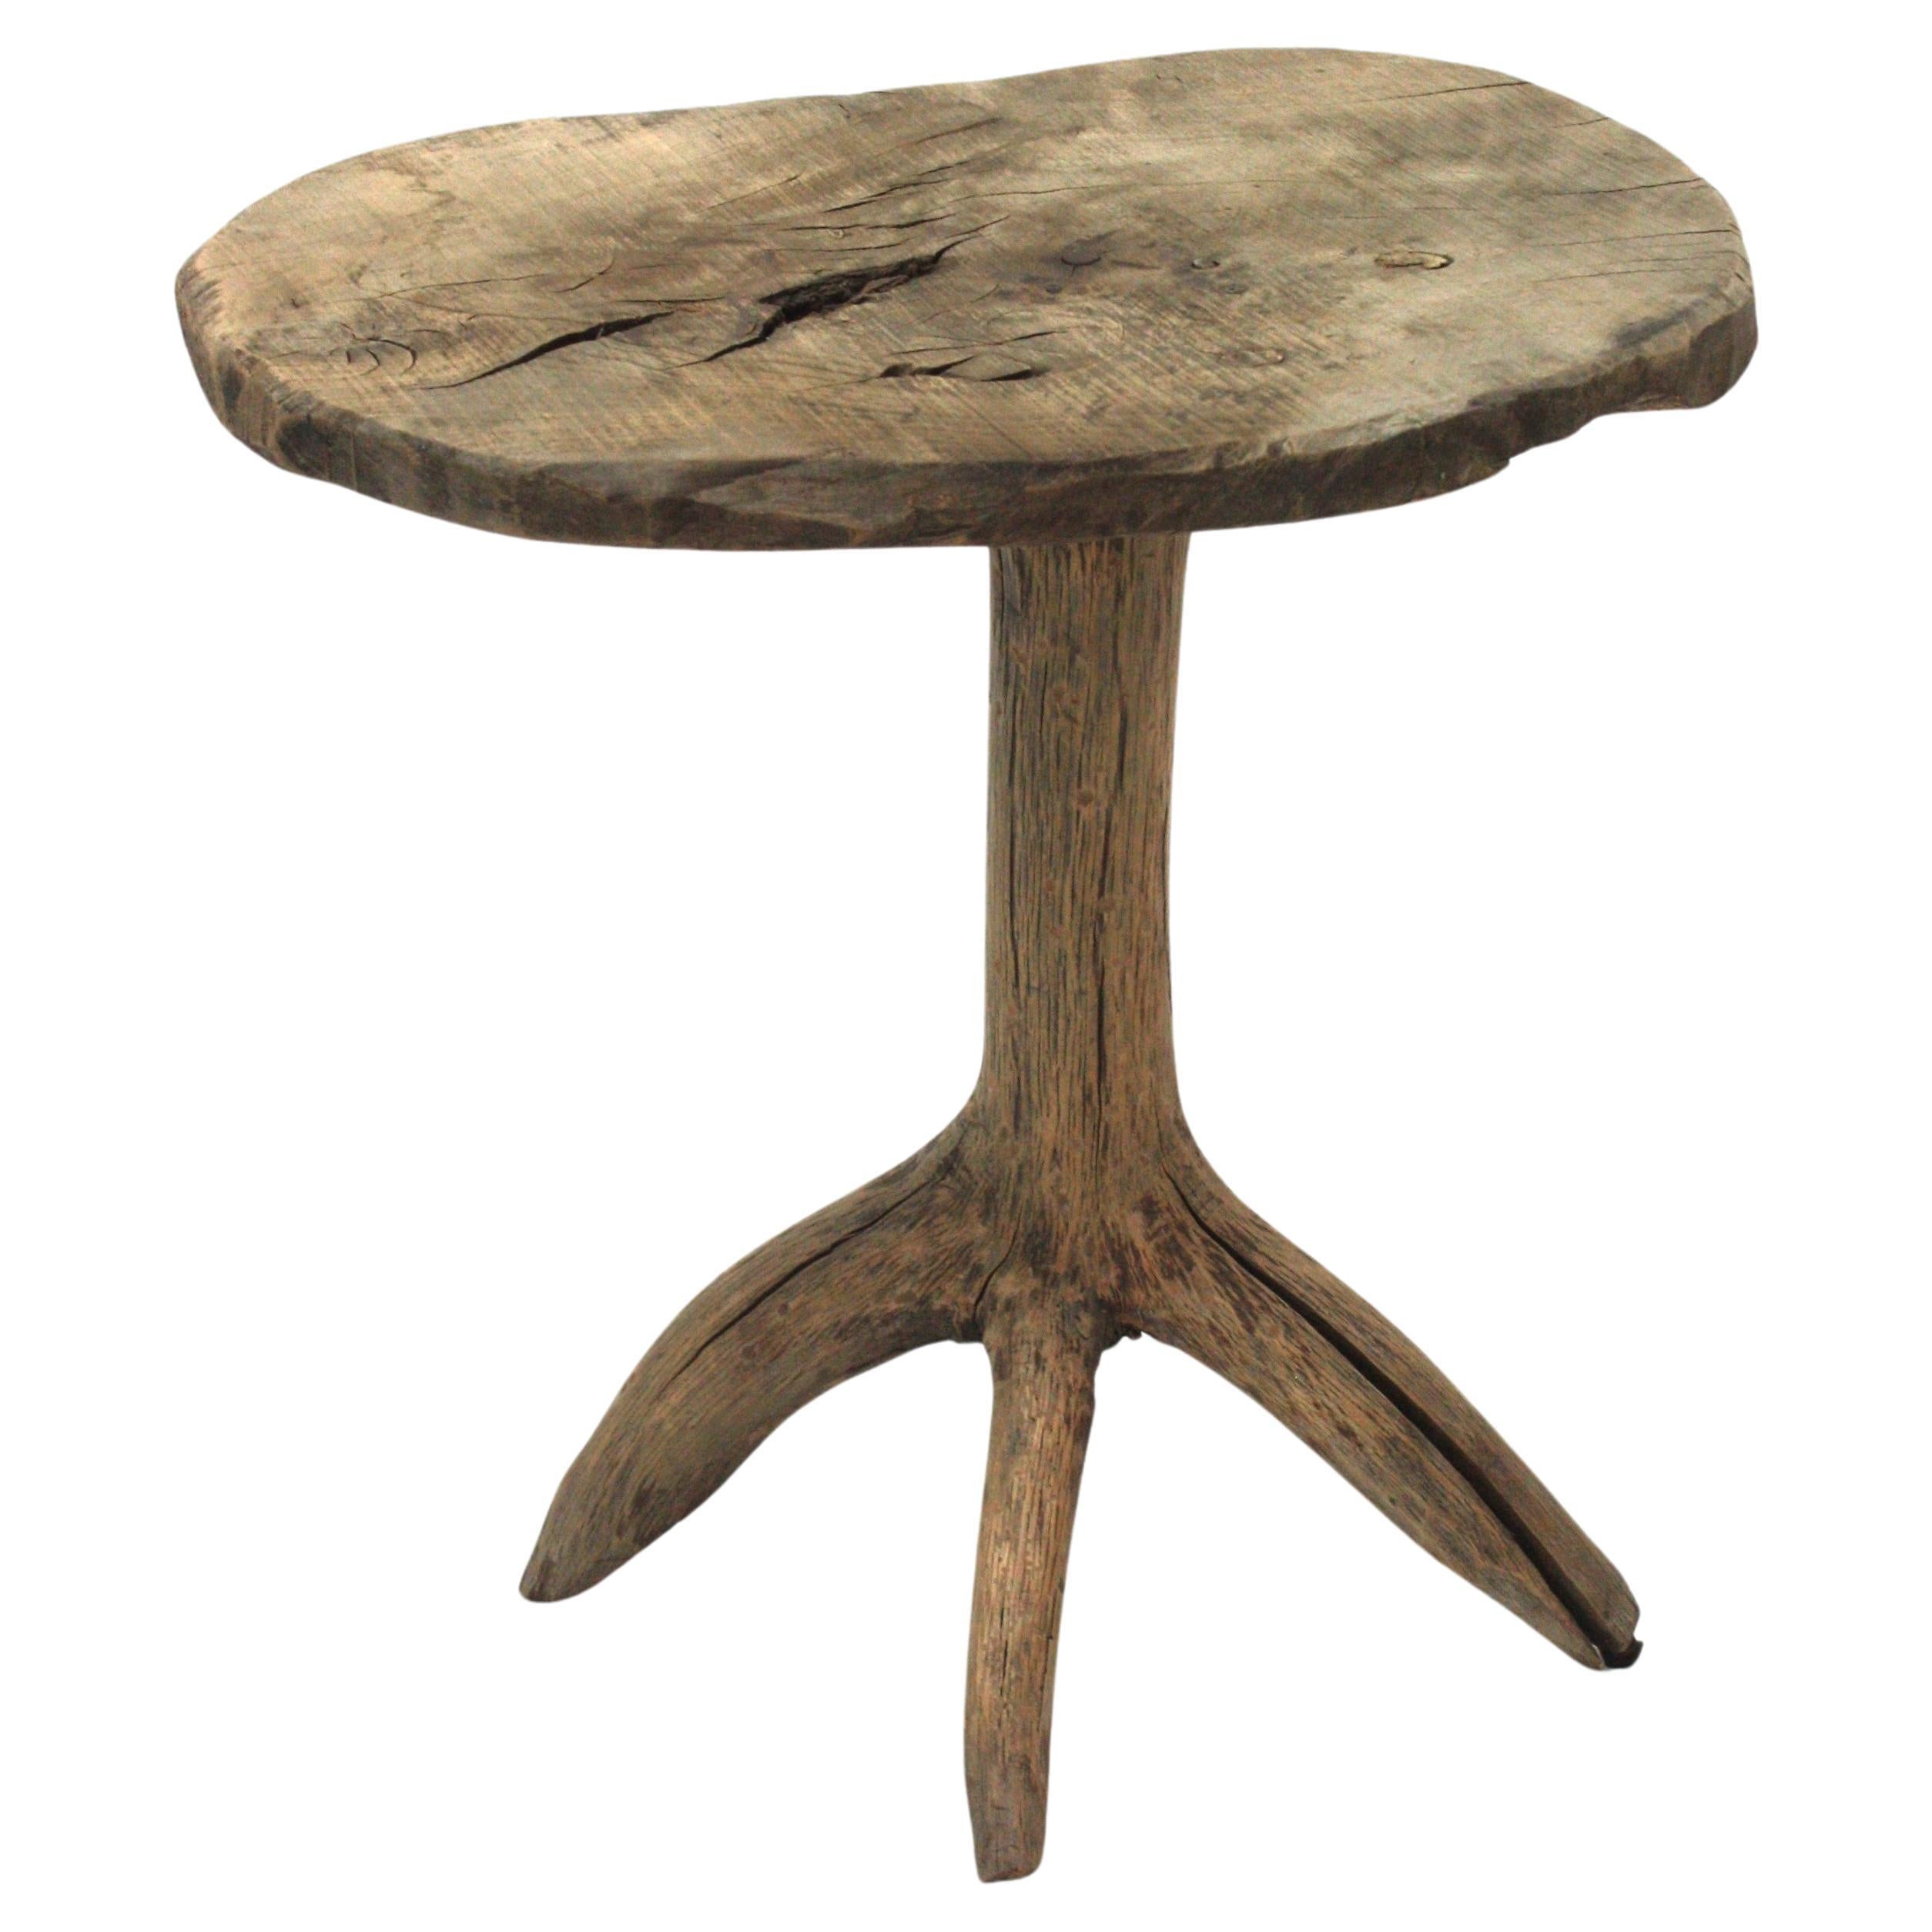 Spanish Side Table in Natural Wood
Spanish Brutalist Wabi Sabi Rustic Tripod Side Table, 1950s
Eye-catching wooden rustic tripod four footed side table with organic design and natural finish.
This sculptural end or side table has a primitive